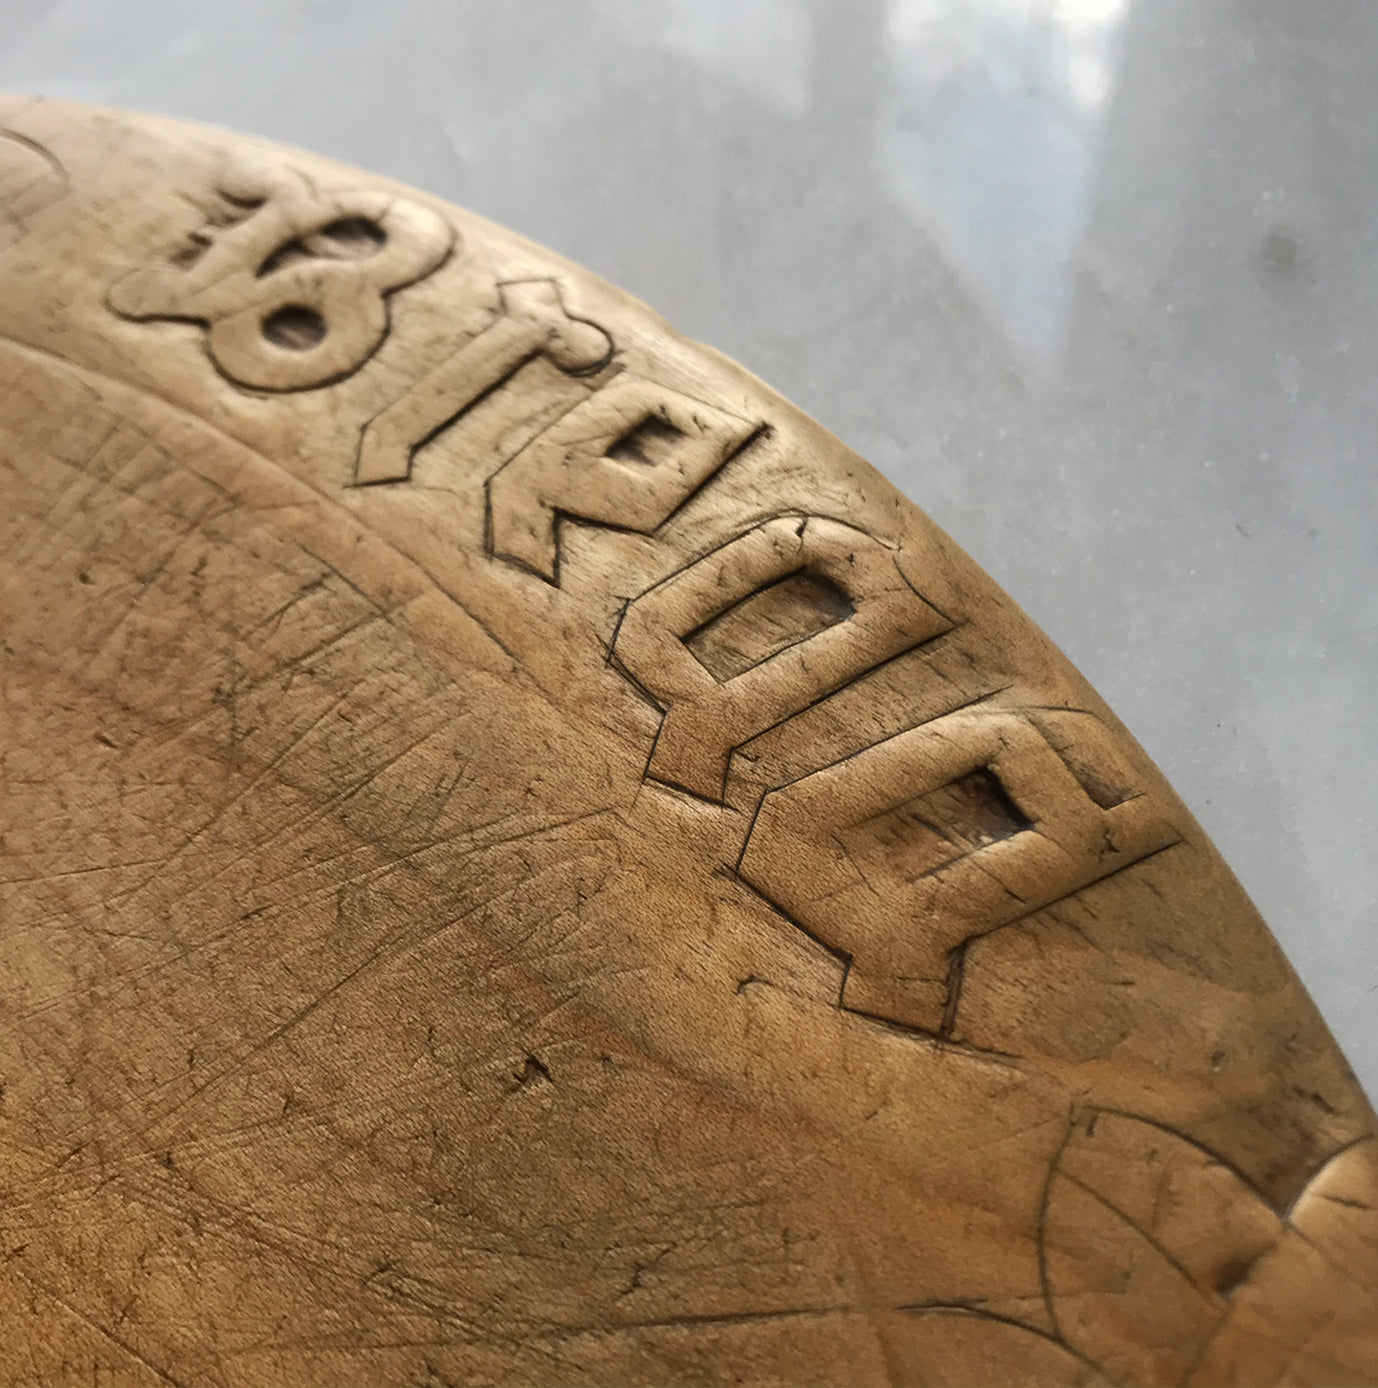 Late Victorian Hand Carved Sycamore Bread Board with the word BREAD carved on it - Nicely worn and lays nice and flat - no worm! - SHOP NOW - www.intovintage.co.uk